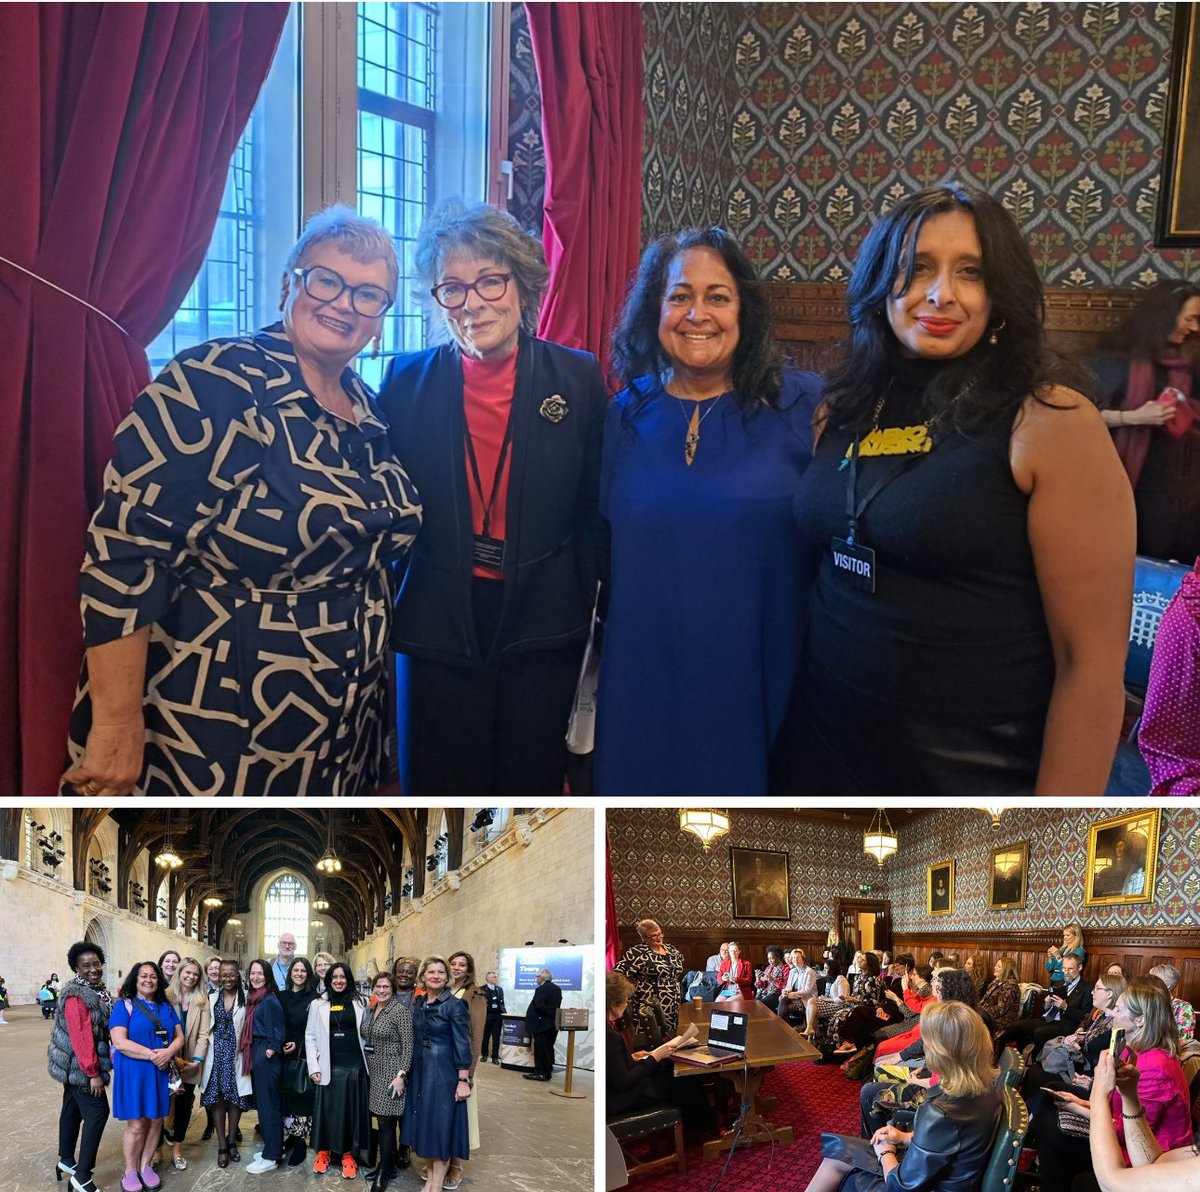 Thank you so much @carolynharris24 for making this happen. A House of Commons event on the need for menopause education. And thanks to our co chair @lregan7 and my partner in crime Shema Tariq @savoy__truffle and our amazing speakers and audience.